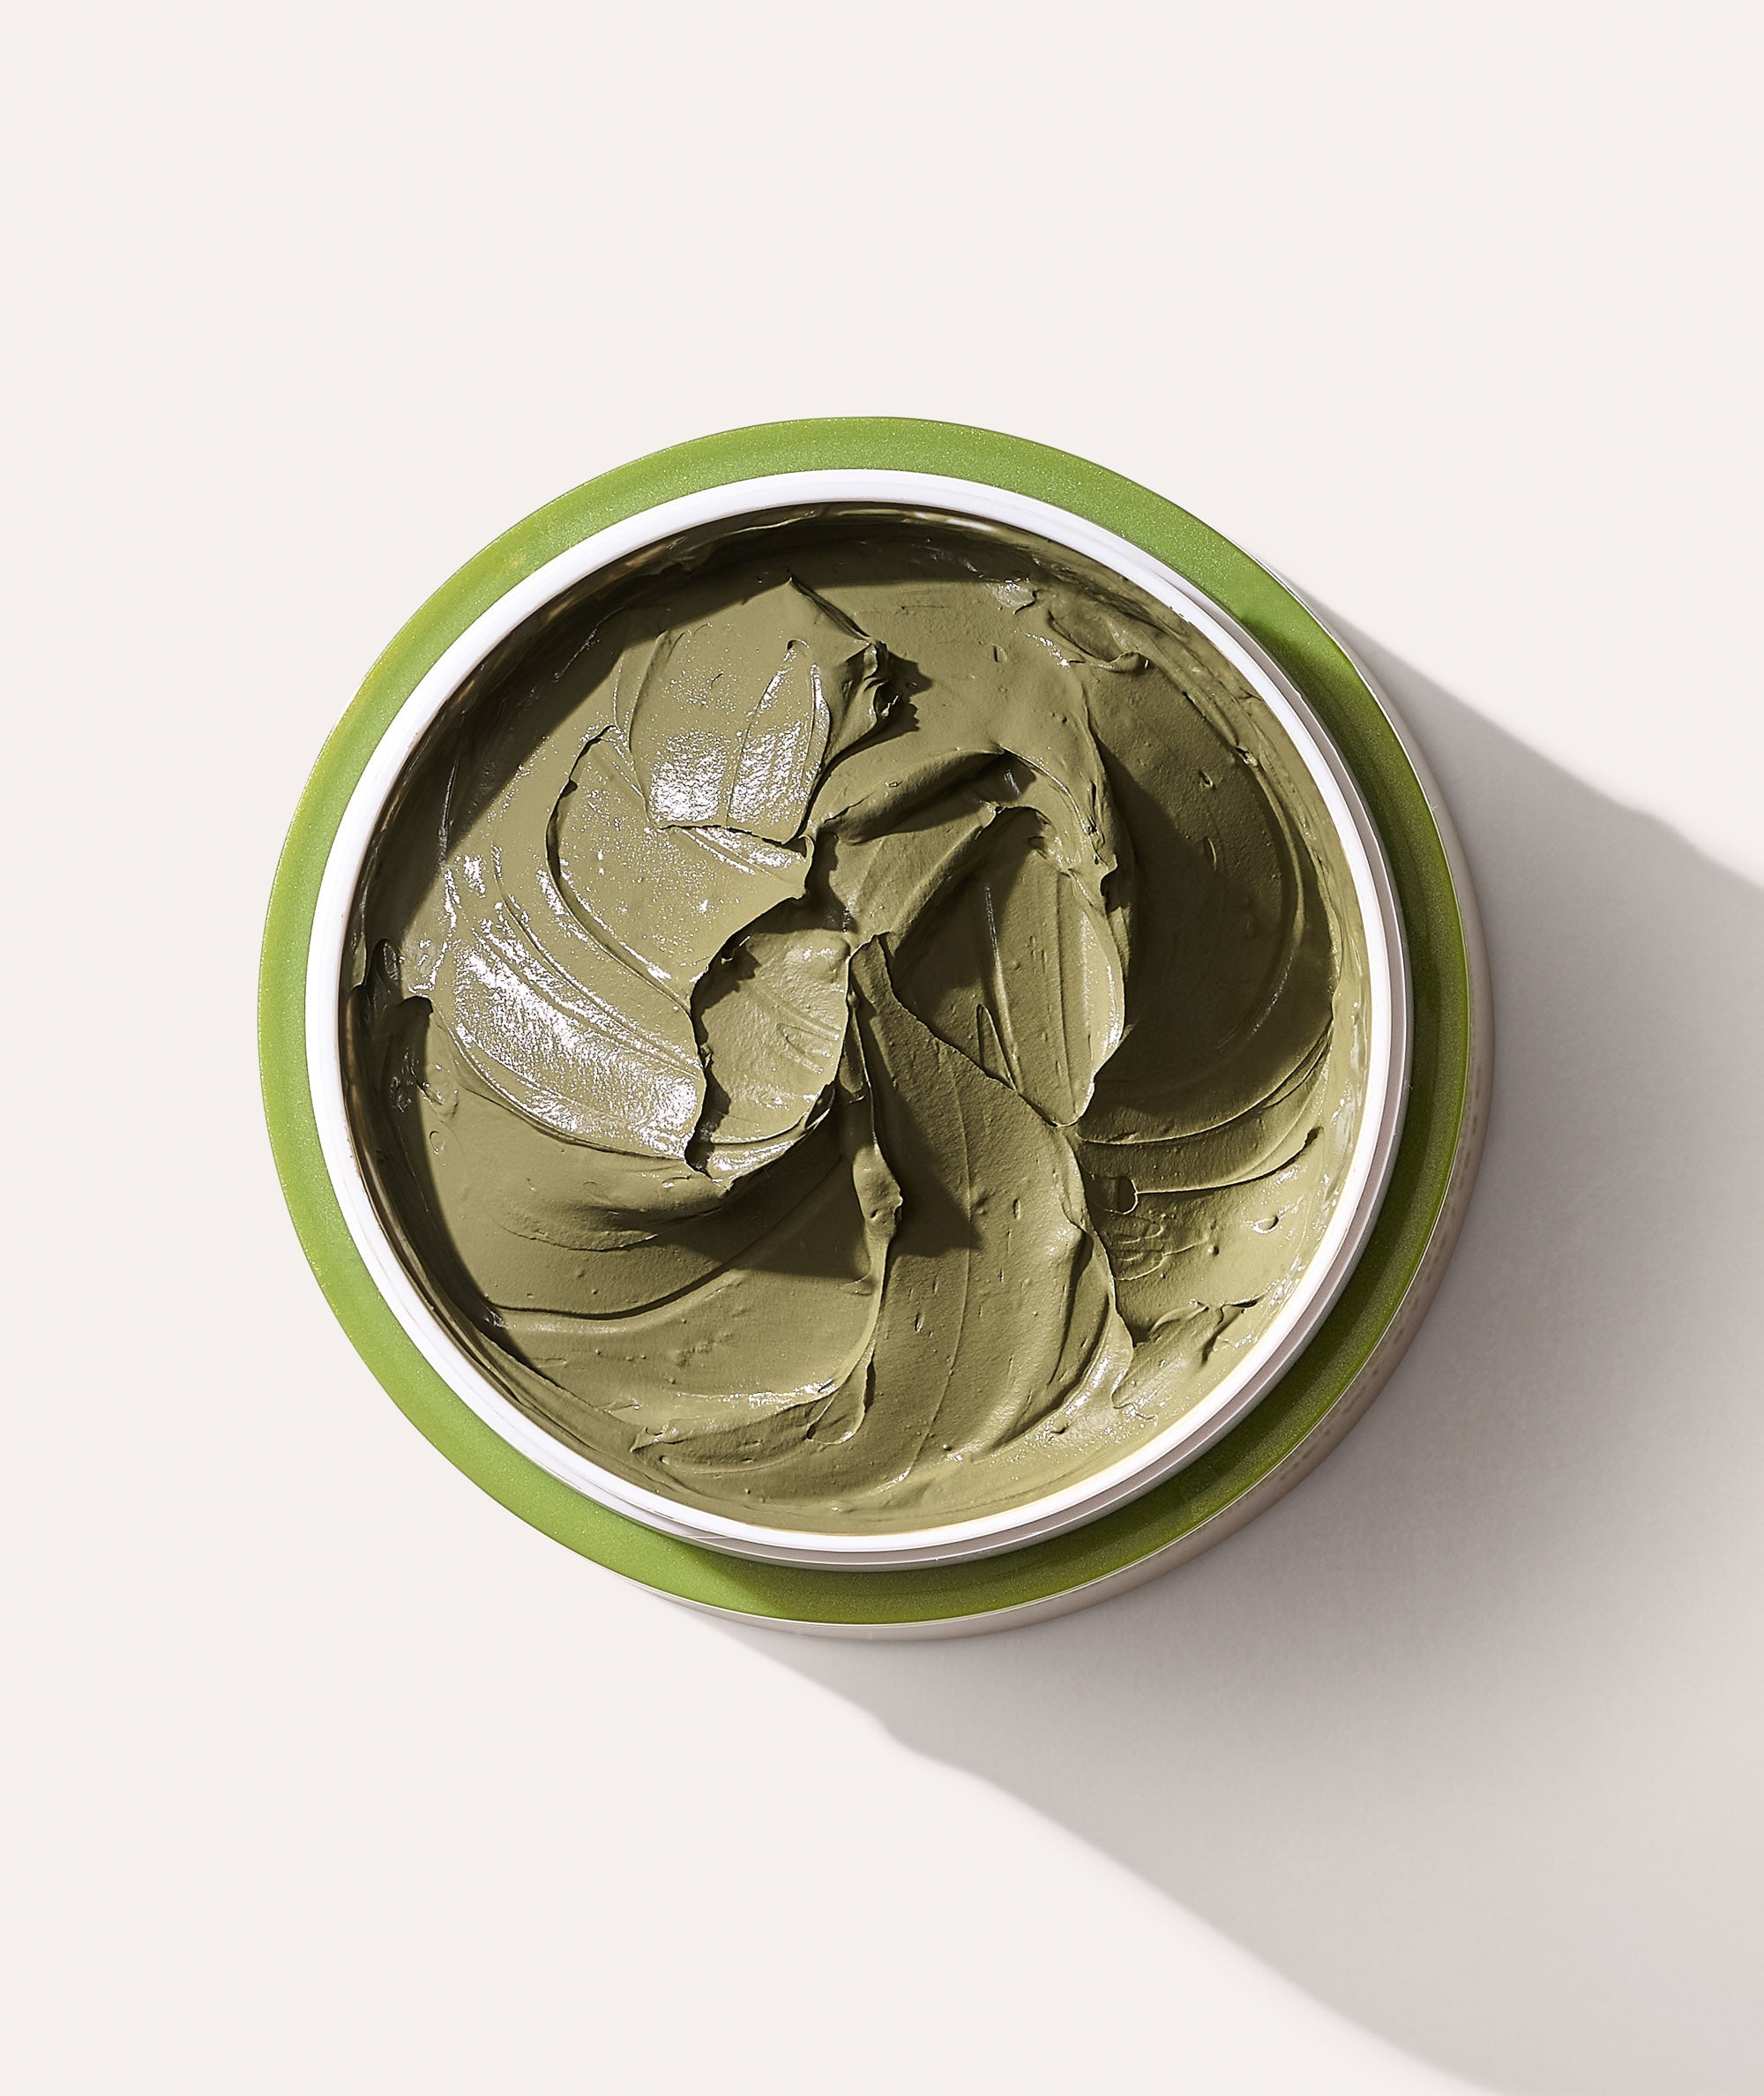 This is a picture of the color and texture of the Borghese Advanced Fango Active Purifying Mud Masks